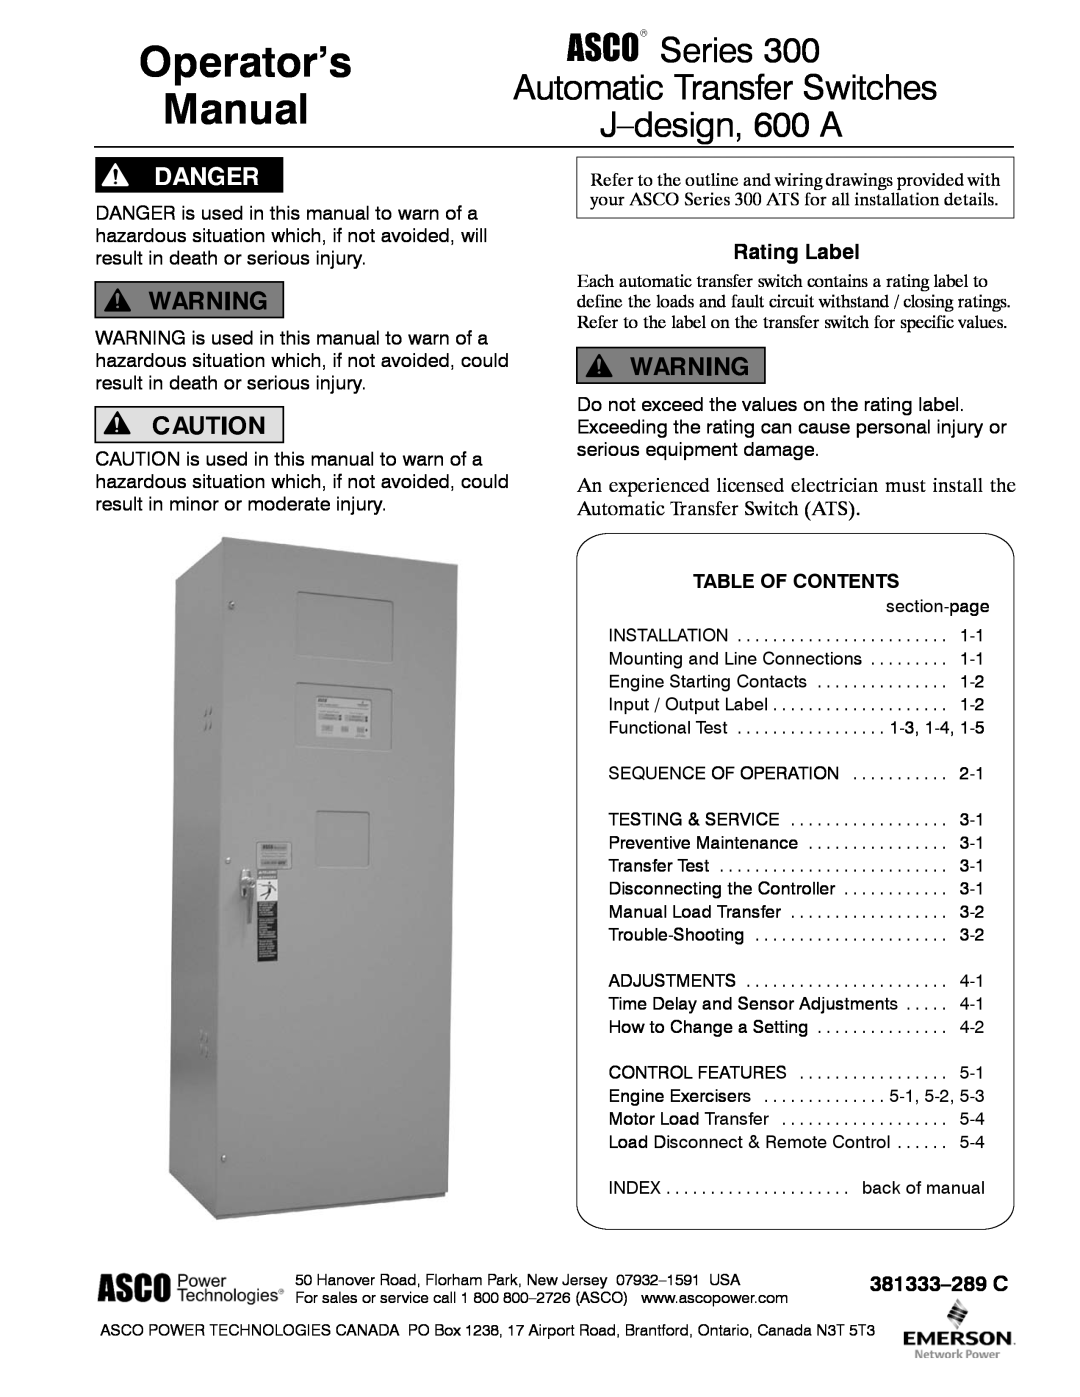 Emerson 300 manual Rating Label, 381333-201 G, Table Of Contents, Operator’s Manual, H-design, 600 through 1200 A 